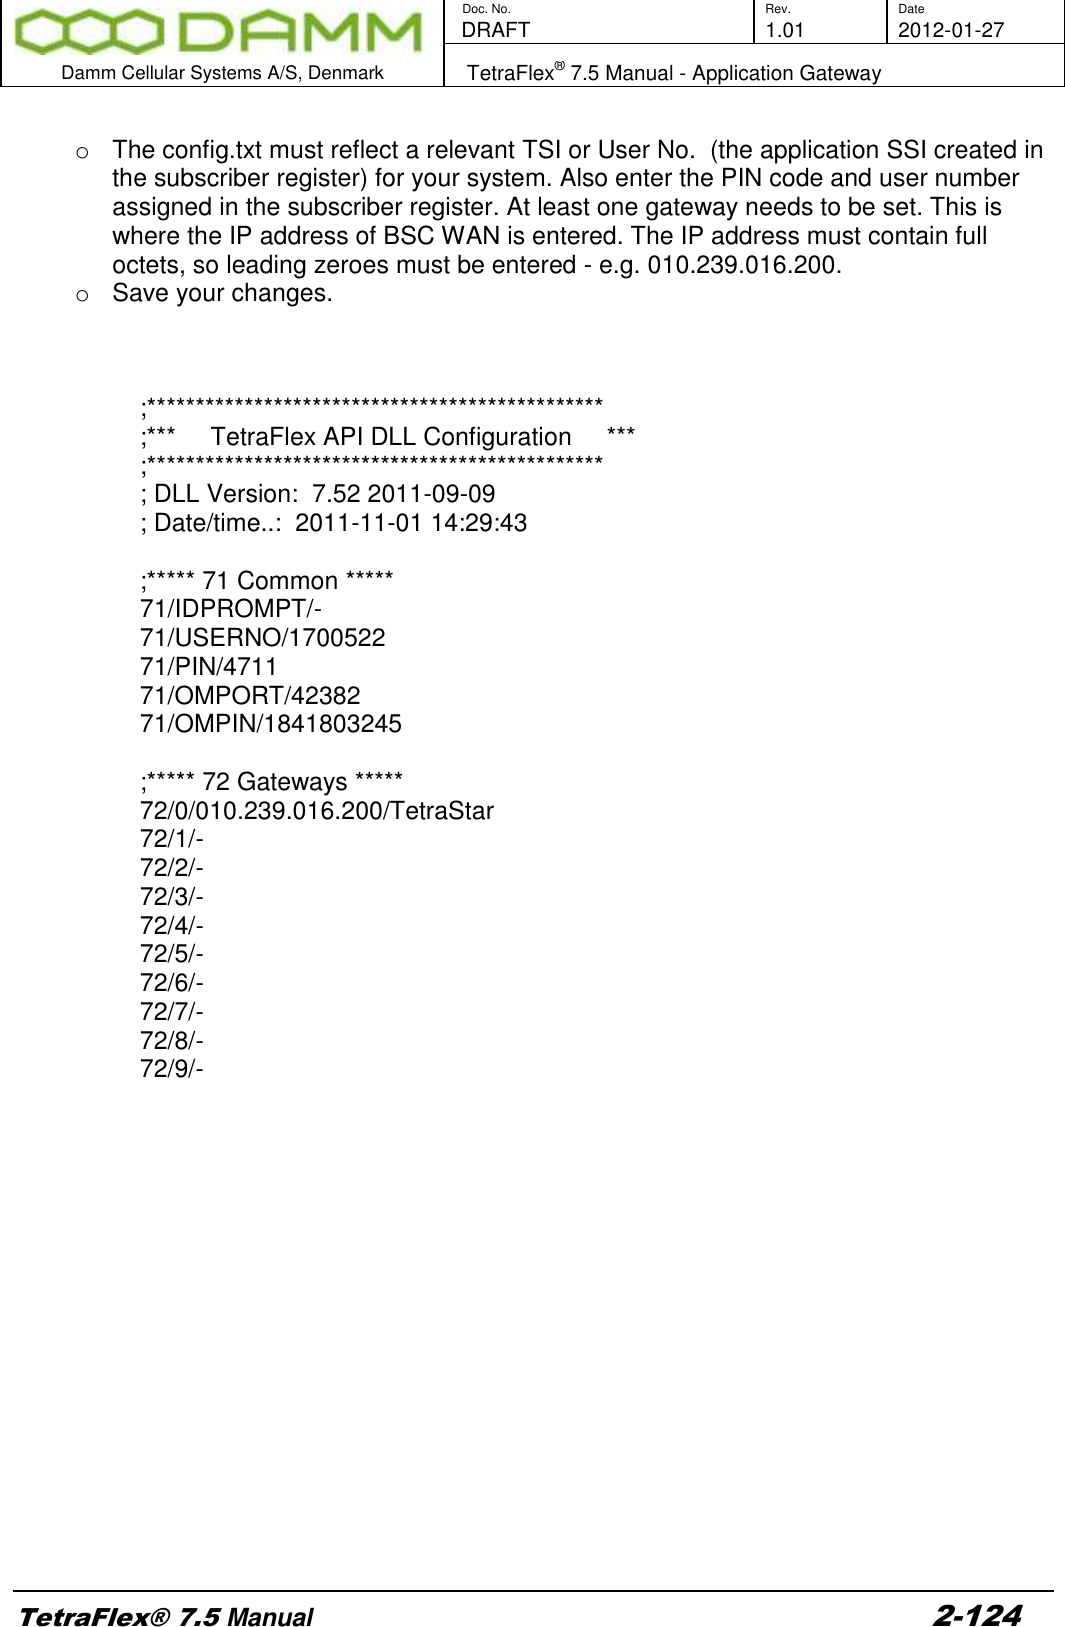        Doc. No. Rev. Date    DRAFT  1.01 2012-01-27  Damm Cellular Systems A/S, Denmark   TetraFlex® 7.5 Manual - Application Gateway  TetraFlex® 7.5 Manual 2-124  o  The config.txt must reflect a relevant TSI or User No.  (the application SSI created in the subscriber register) for your system. Also enter the PIN code and user number assigned in the subscriber register. At least one gateway needs to be set. This is where the IP address of BSC WAN is entered. The IP address must contain full octets, so leading zeroes must be entered - e.g. 010.239.016.200.   o  Save your changes.     ;*********************************************** ;***     TetraFlex API DLL Configuration     *** ;*********************************************** ; DLL Version:  7.52 2011-09-09 ; Date/time..:  2011-11-01 14:29:43  ;***** 71 Common ***** 71/IDPROMPT/- 71/USERNO/1700522 71/PIN/4711 71/OMPORT/42382 71/OMPIN/1841803245  ;***** 72 Gateways ***** 72/0/010.239.016.200/TetraStar 72/1/- 72/2/- 72/3/- 72/4/- 72/5/- 72/6/- 72/7/- 72/8/- 72/9/- 